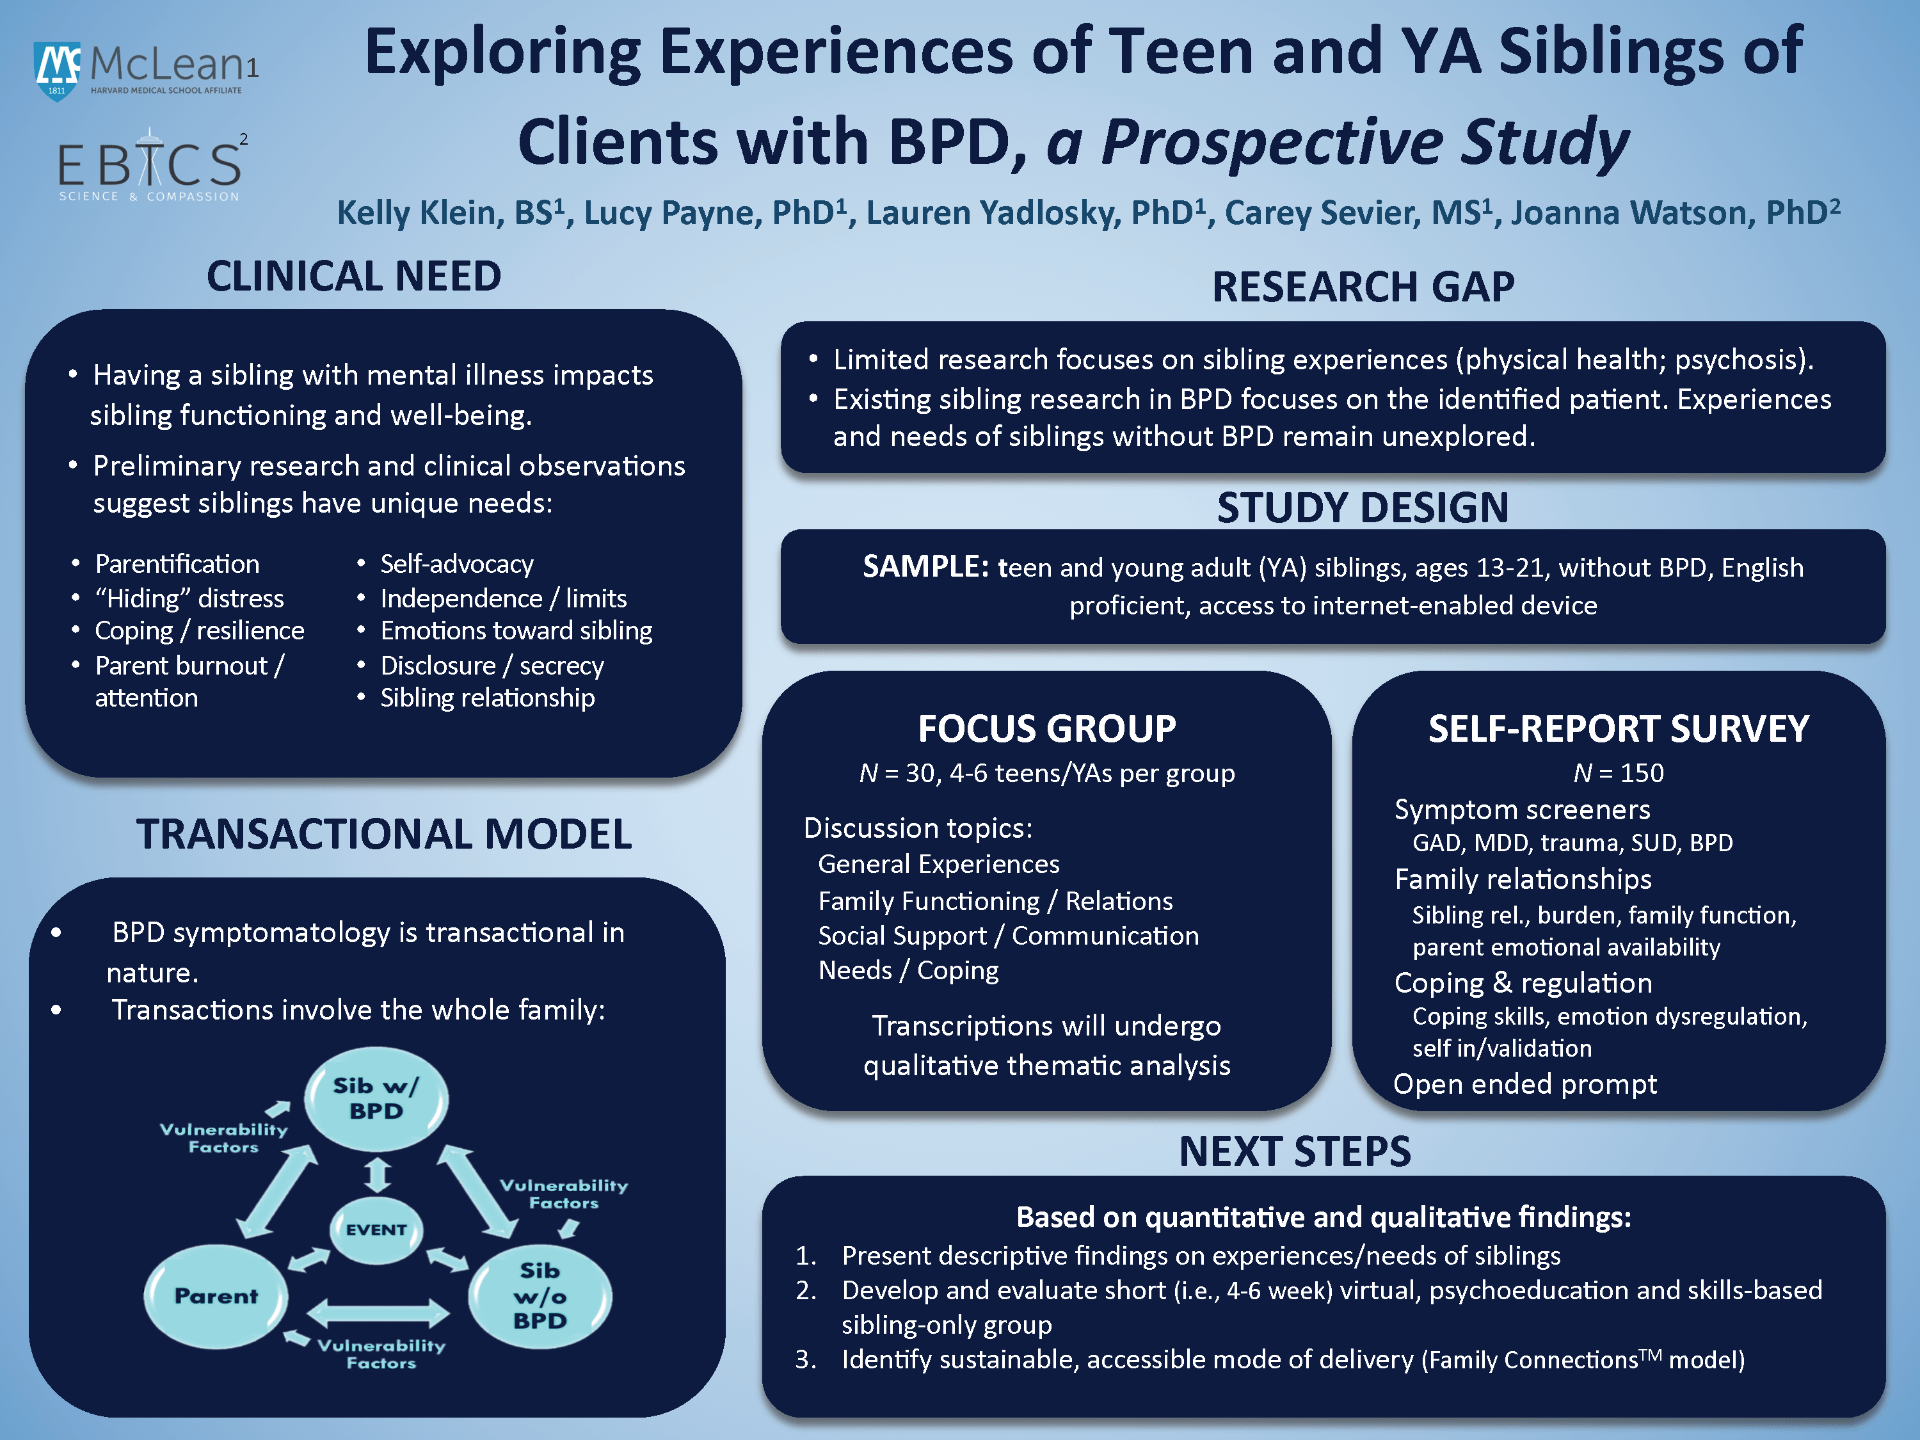 Exploring Experiences of Teen and Young Adult Siblings of Clients with BPD